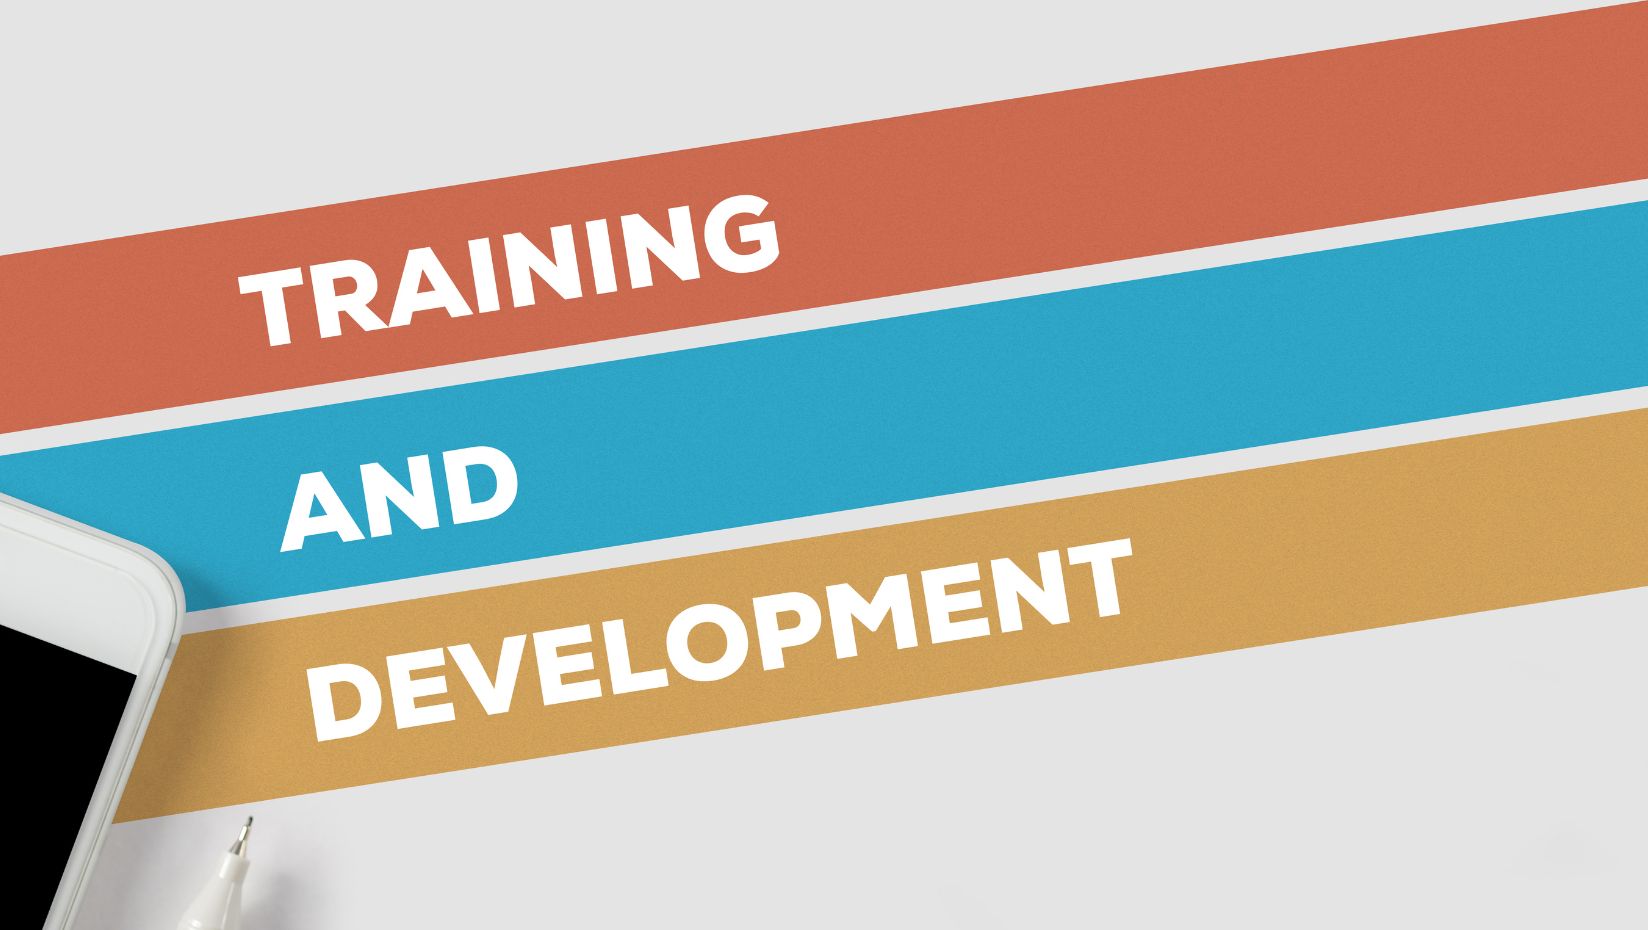 image with the words "training and development"